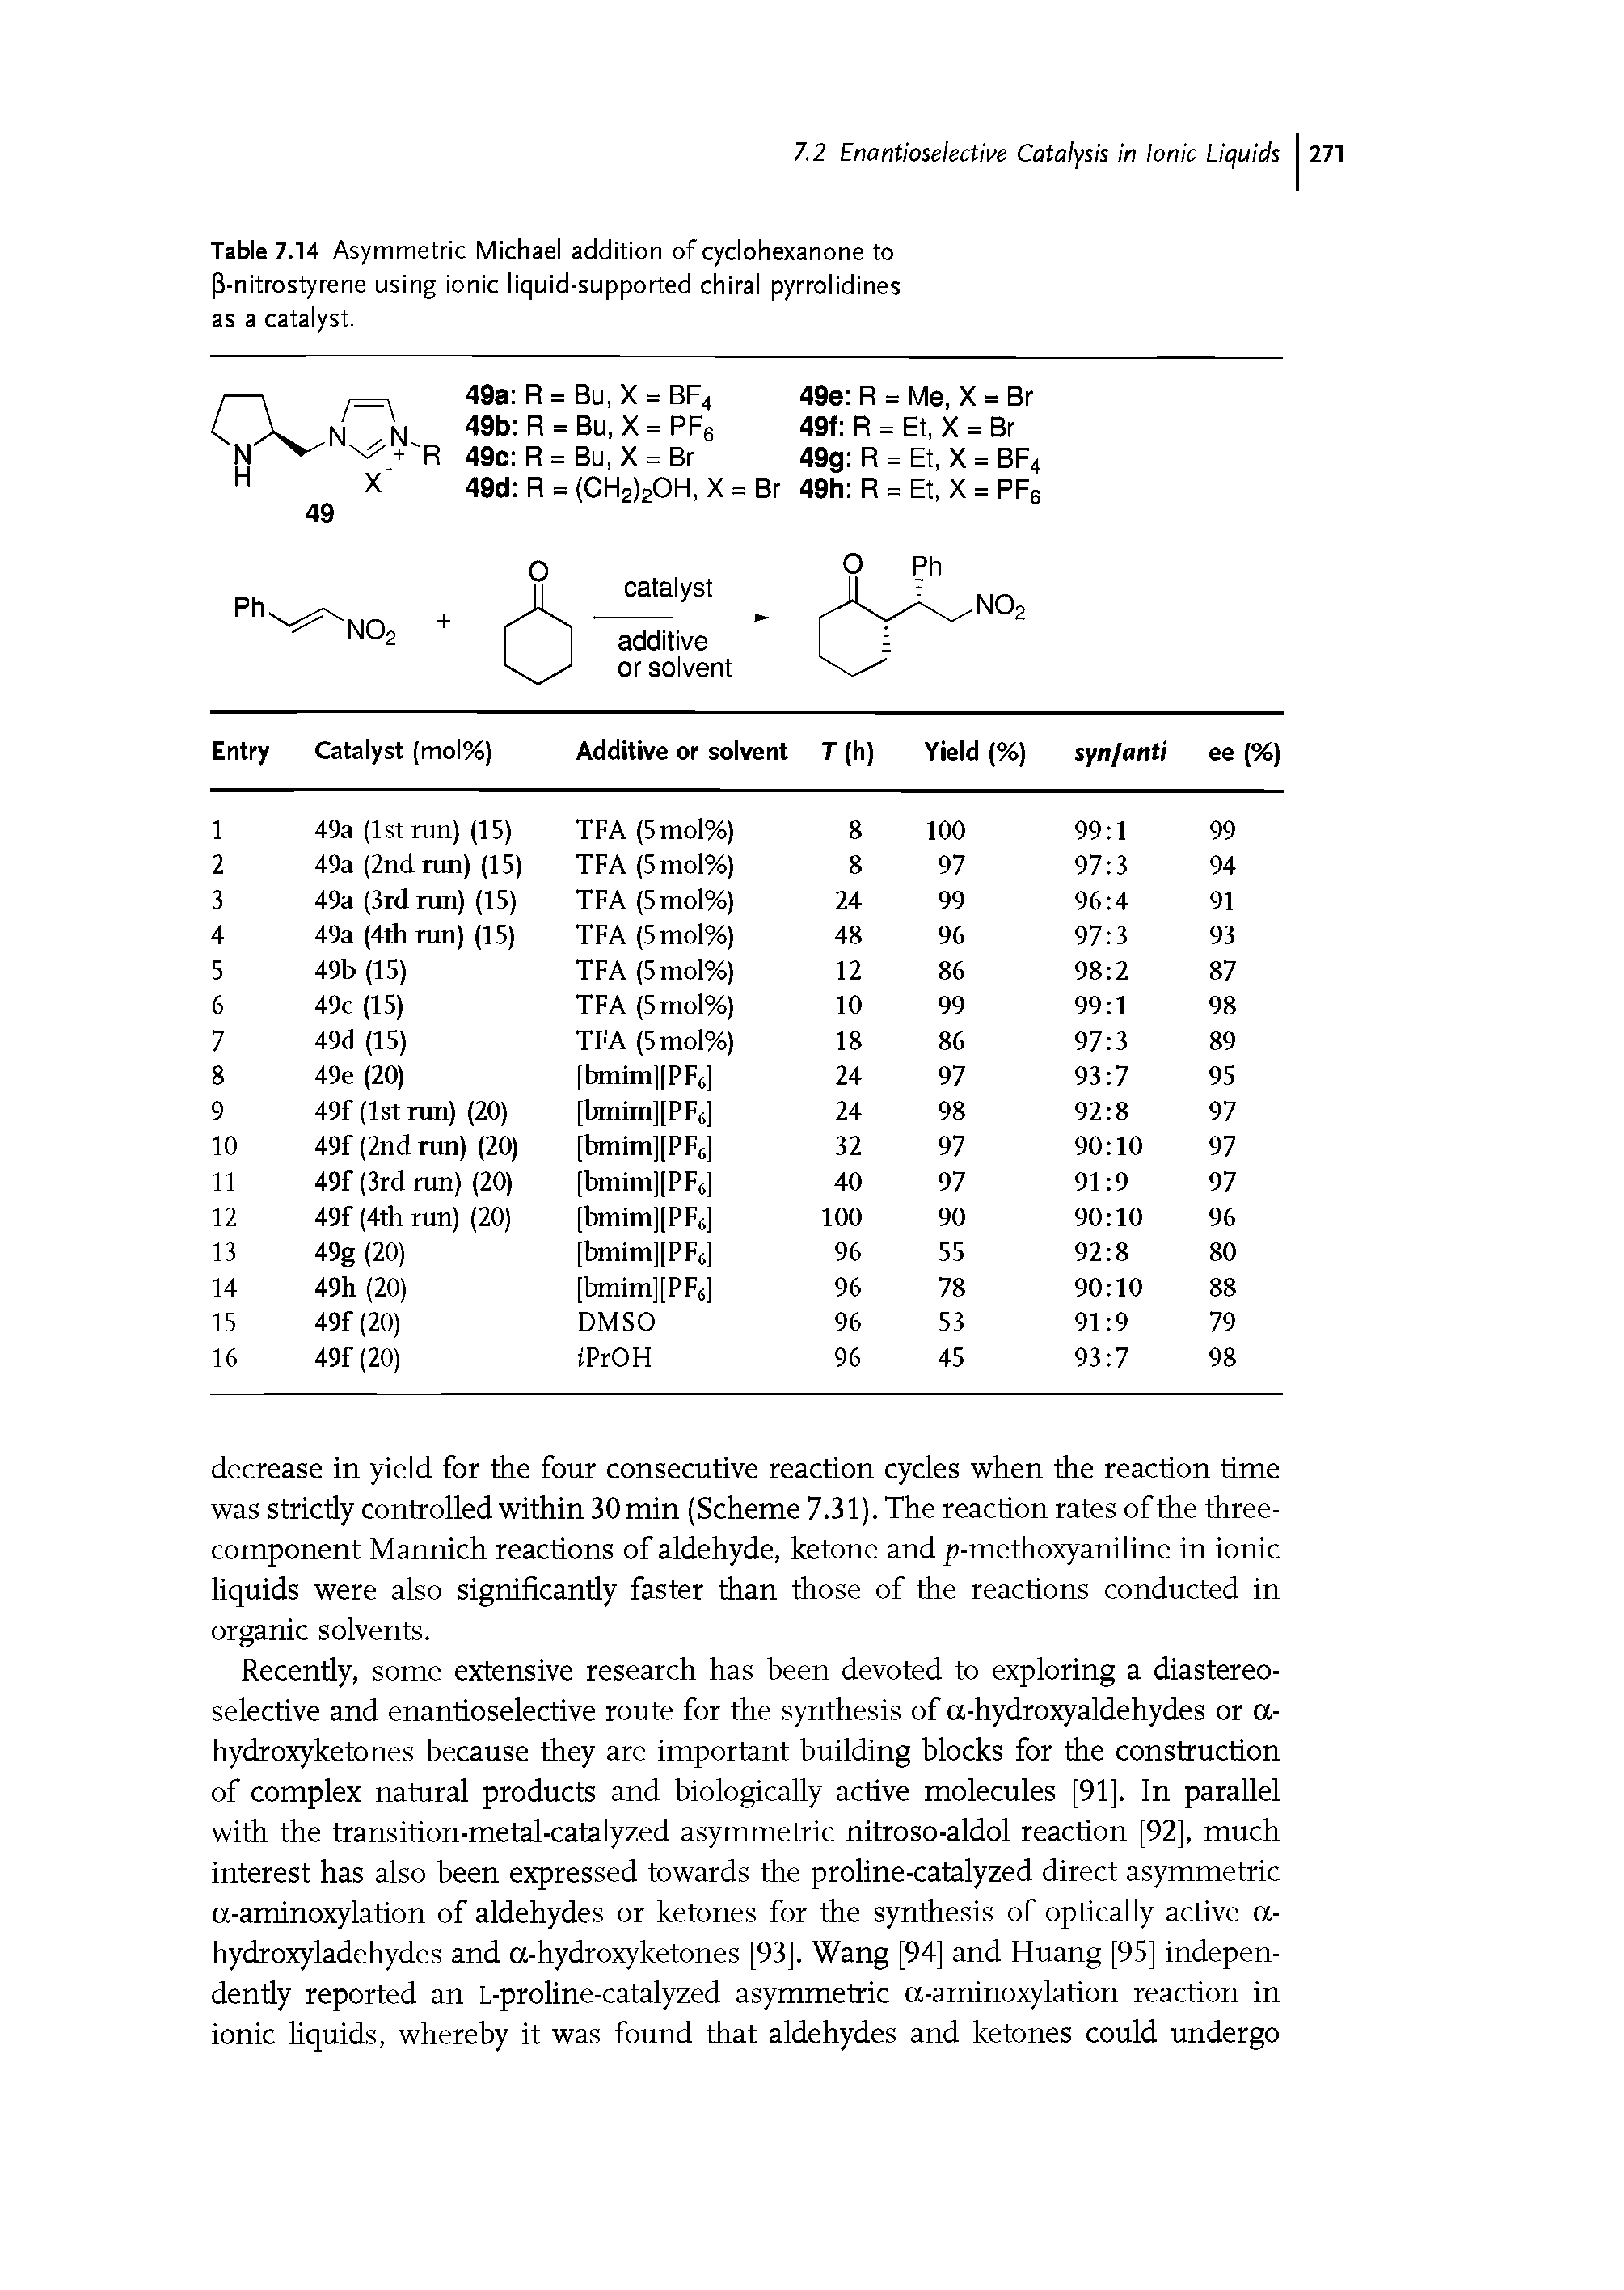 Table 7.14 Asymmetric Michael addition of cyclohexanone to P-nitrostyrene using ionic liquid-supported chiral pyrrolidines as a catalyst.